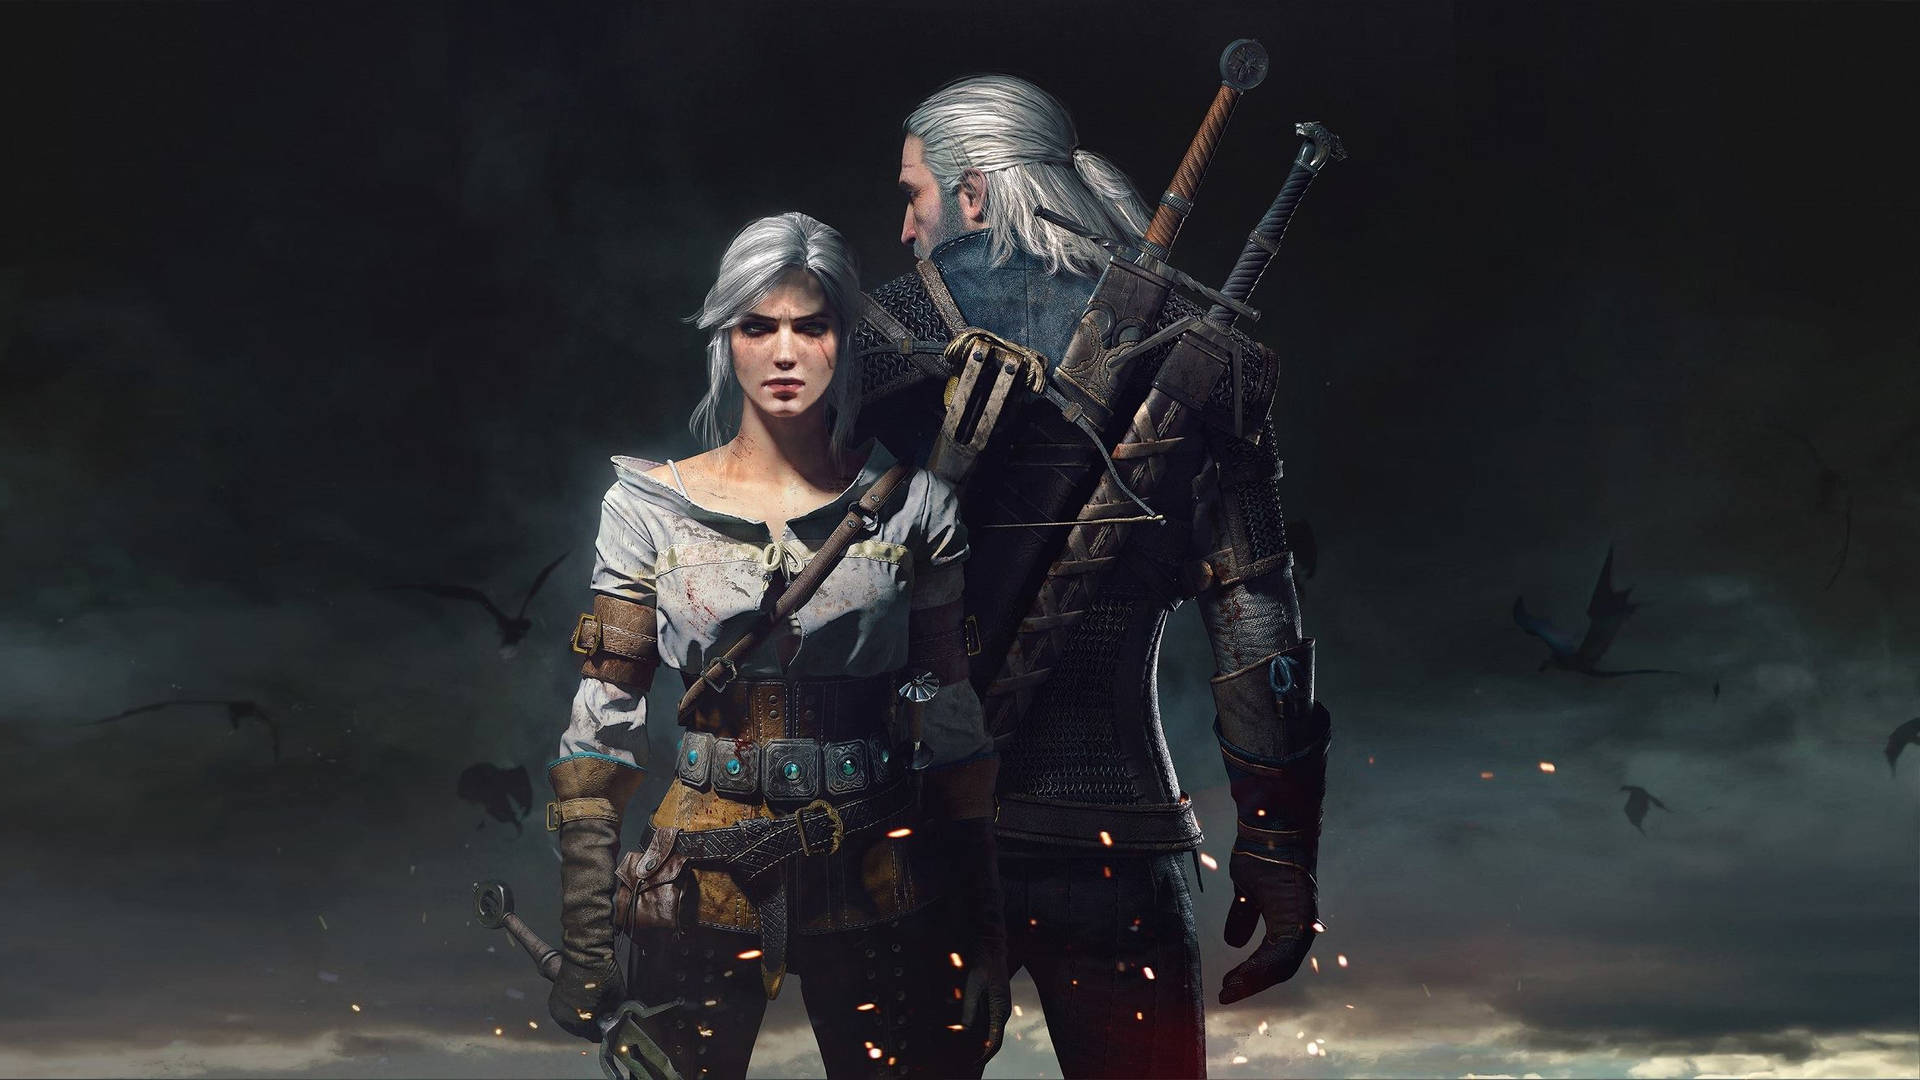 Download FREEThe Witcher 3 Wallpaper